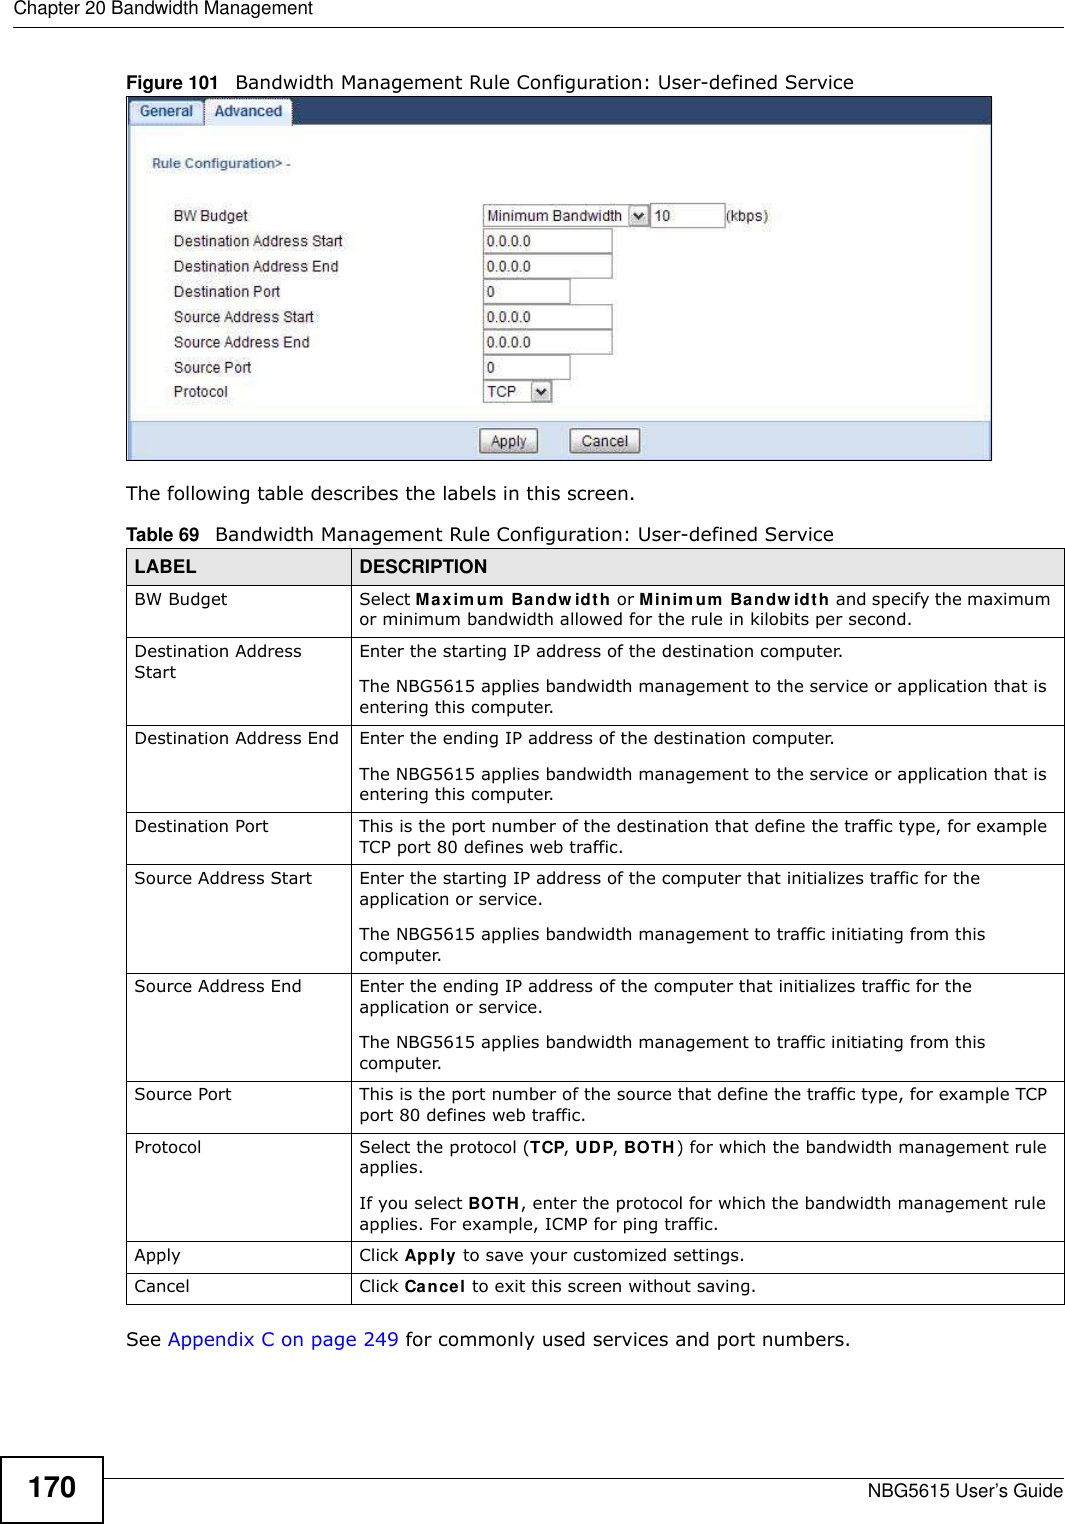 Chapter 20 Bandwidth ManagementNBG5615 User’s Guide170Figure 101   Bandwidth Management Rule Configuration: User-defined Service The following table describes the labels in this screen.See Appendix C on page 249 for commonly used services and port numbers.Table 69   Bandwidth Management Rule Configuration: User-defined ServiceLABEL DESCRIPTIONBW Budget Select Maxim um Bandw idth or Minimum  Bandw idth and specify the maximum or minimum bandwidth allowed for the rule in kilobits per second. Destination Address StartEnter the starting IP address of the destination computer.The NBG5615 applies bandwidth management to the service or application that is entering this computer. Destination Address End Enter the ending IP address of the destination computer.The NBG5615 applies bandwidth management to the service or application that is entering this computer. Destination Port This is the port number of the destination that define the traffic type, for example TCP port 80 defines web traffic.Source Address Start Enter the starting IP address of the computer that initializes traffic for the application or service. The NBG5615 applies bandwidth management to traffic initiating from this computer. Source Address End Enter the ending IP address of the computer that initializes traffic for the application or service. The NBG5615 applies bandwidth management to traffic initiating from this computer. Source Port This is the port number of the source that define the traffic type, for example TCP port 80 defines web traffic.Protocol Select the protocol (TCP, UDP, BOTH) for which the bandwidth management rule applies. If you select BOTH, enter the protocol for which the bandwidth management rule applies. For example, ICMP for ping traffic.Apply Click Apply to save your customized settings.Cancel Click Cancel to exit this screen without saving.